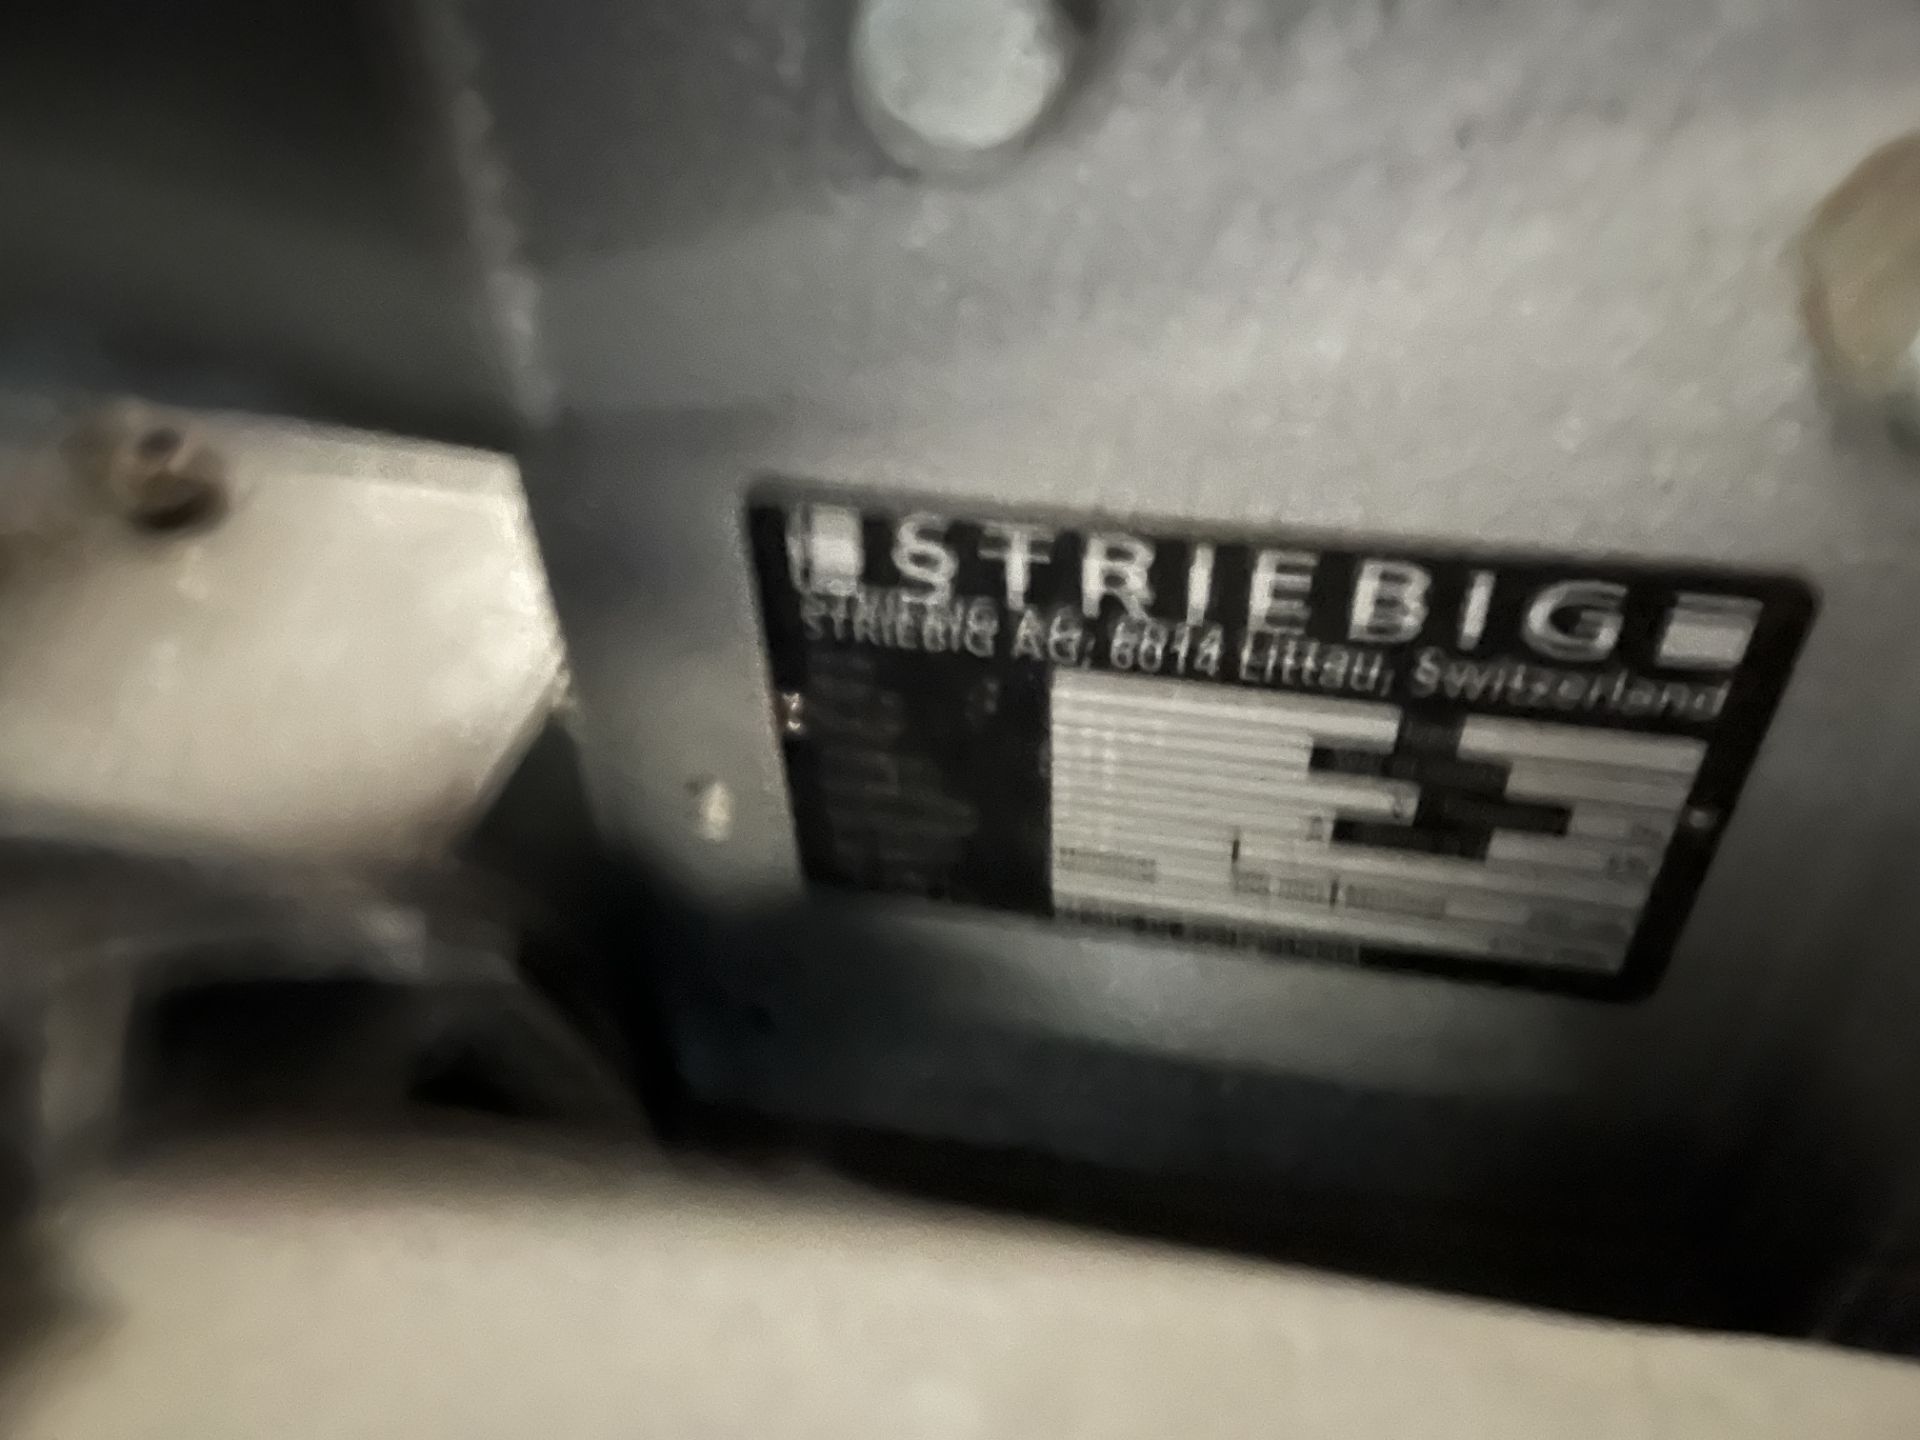 Striebig 860 5D2 Vertical Panel Saw Serial No 61 622 - Image 2 of 2